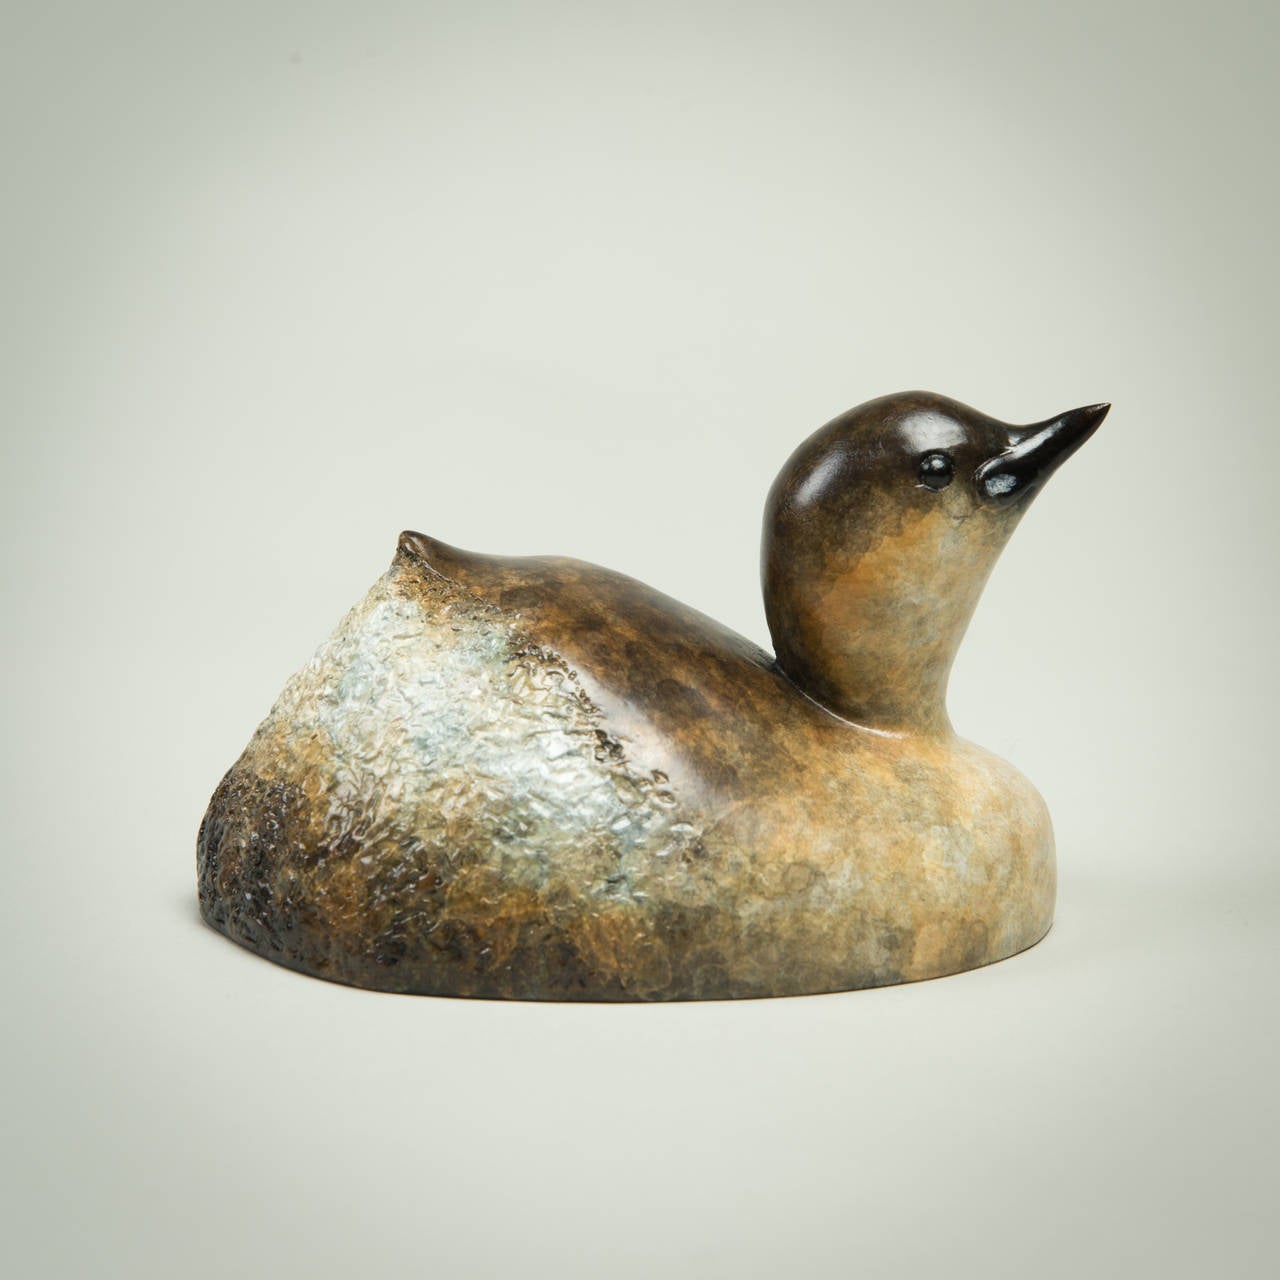 'Dabchick' is a solid Bronze sculpture with a stunning patination. Richard Smith's ability to convey so much character with such simple lines is a testament to the knowledge and love the artist has of the animals he sculpts.

 Richard J. Smith was